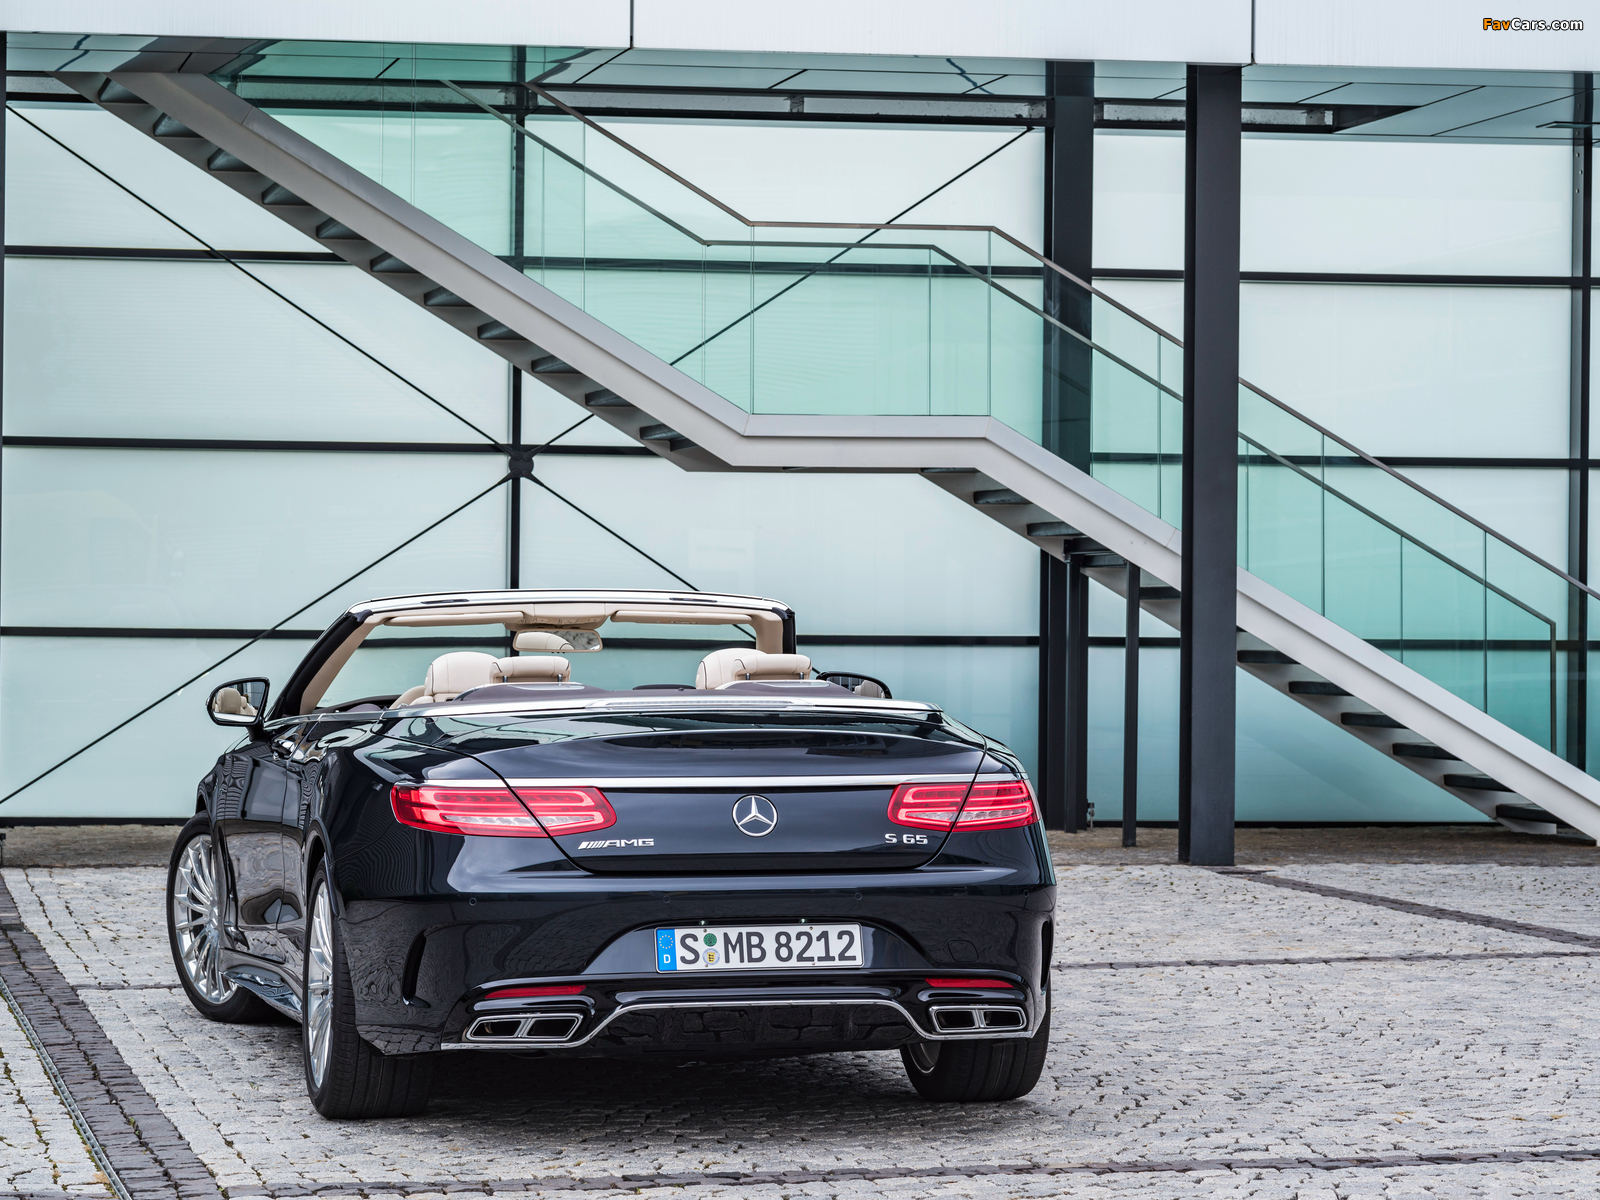 Mercedes-AMG S 65 Cabriolet (A217) 2016 pictures (1600 x 1200)